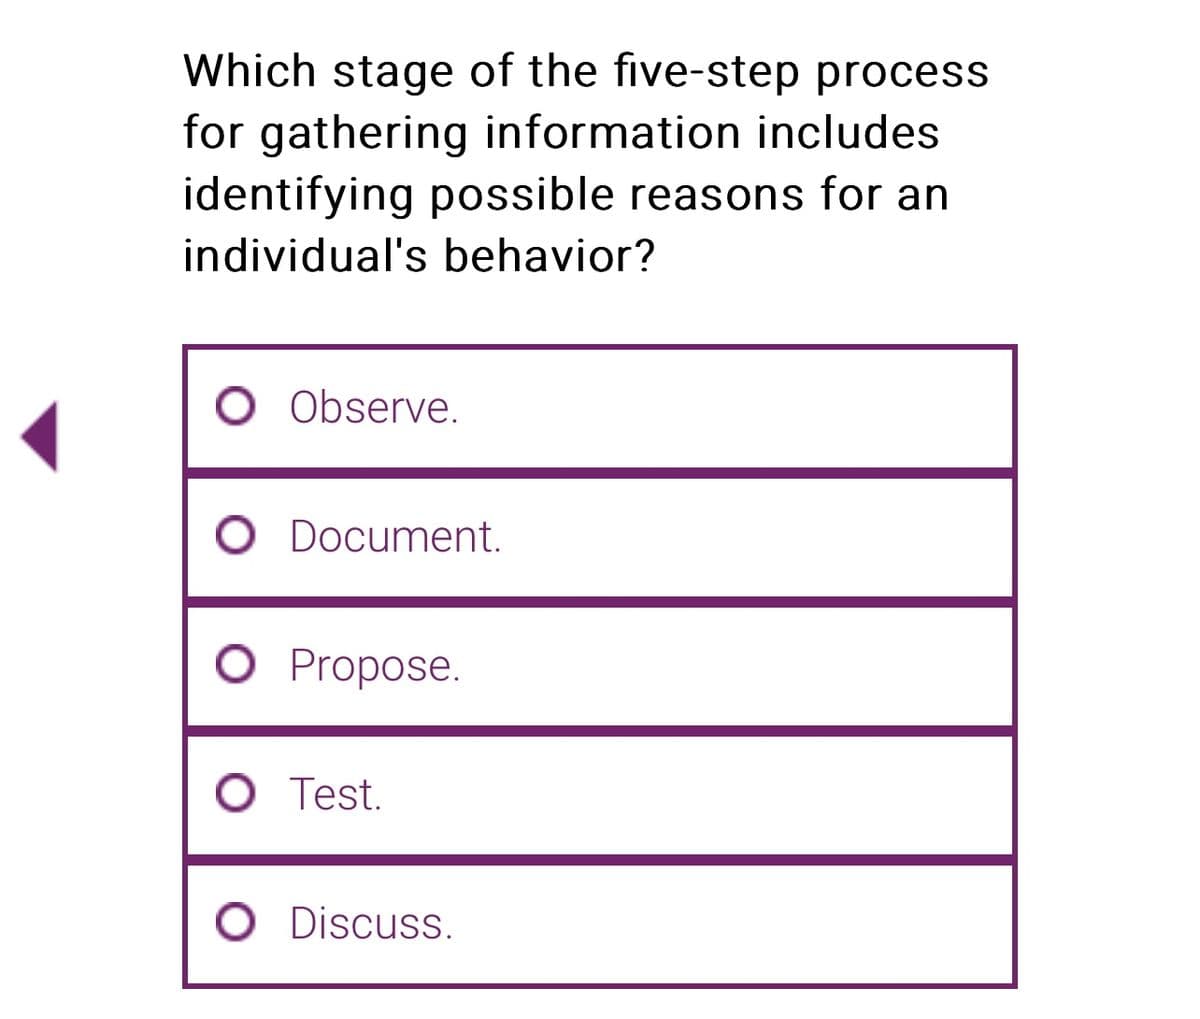 Which stage of the five-step process
for gathering information includes
identifying possible reasons for an
individual's behavior?
O Observe.
O Document.
O Propose.
O Test.
O Discuss.